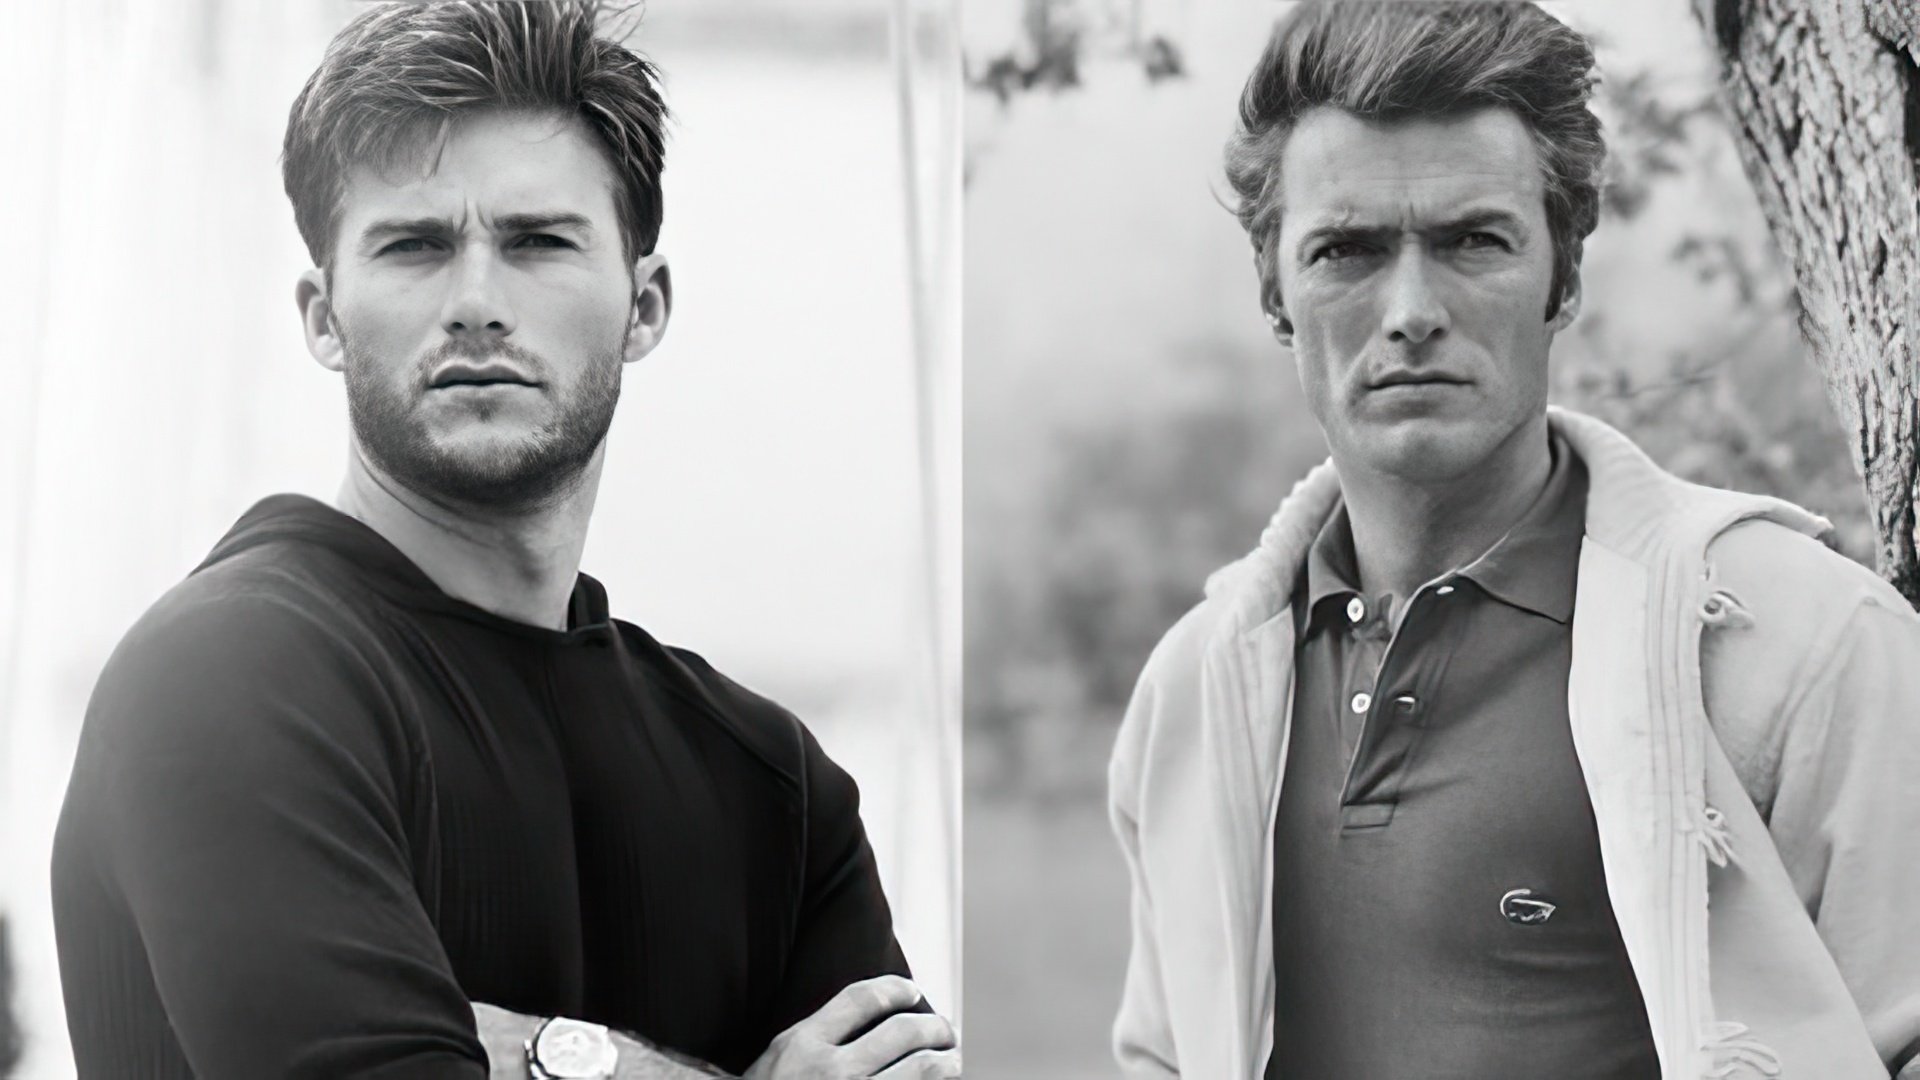 Many people have noticed the similarity between Scott Eastwood and his legendary father